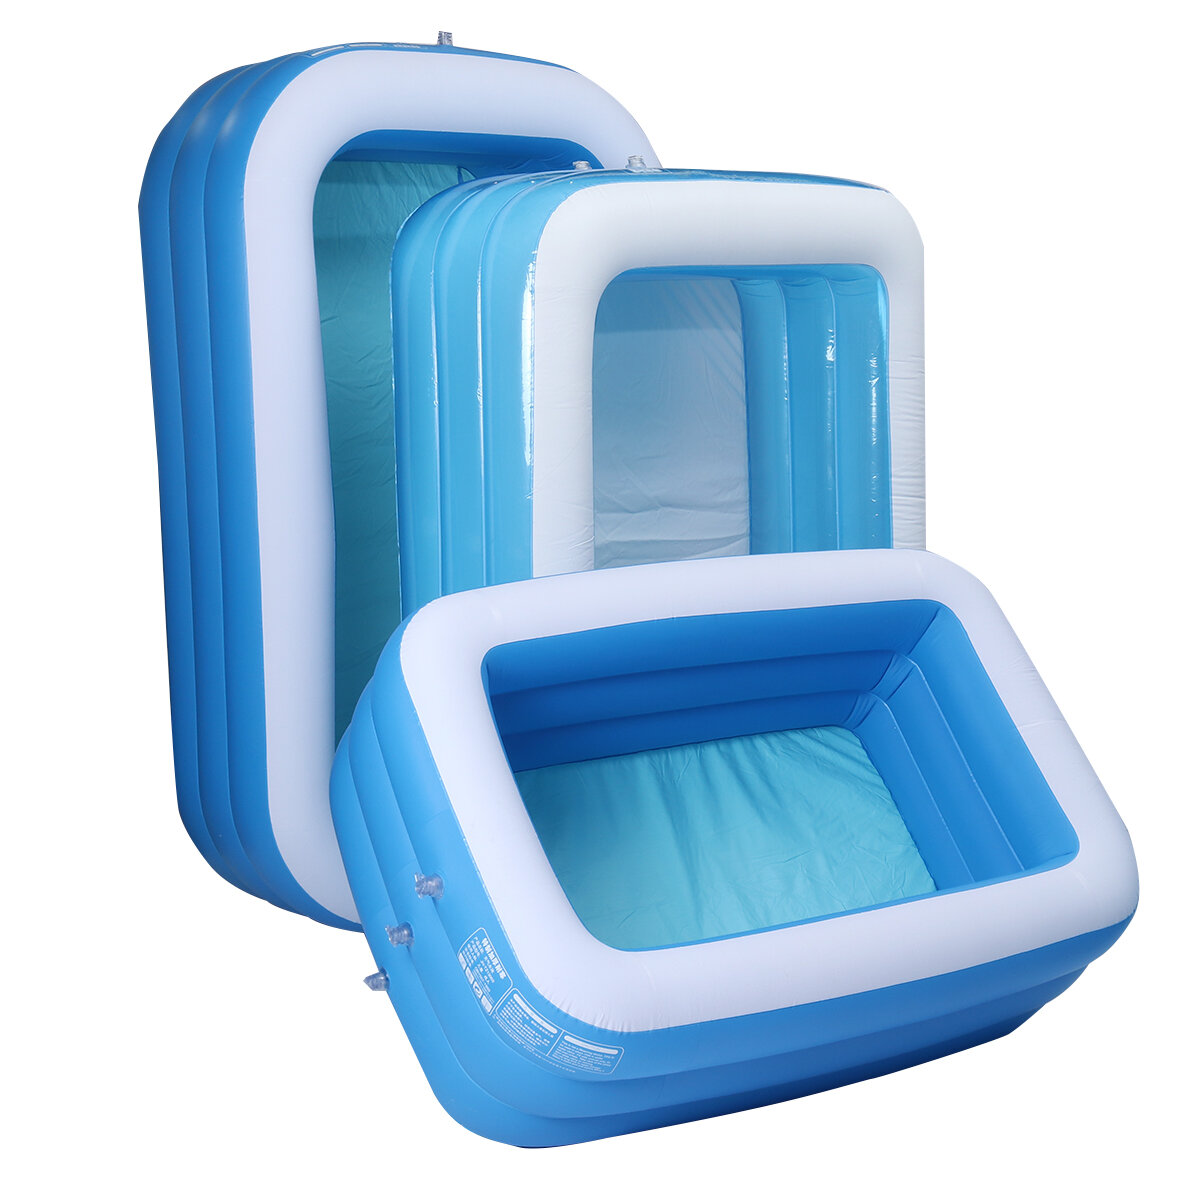 Children's Inflatable Swimming Pool Square Thickened Ocean Ball Pool Outdoor Home Baby Family Pool C